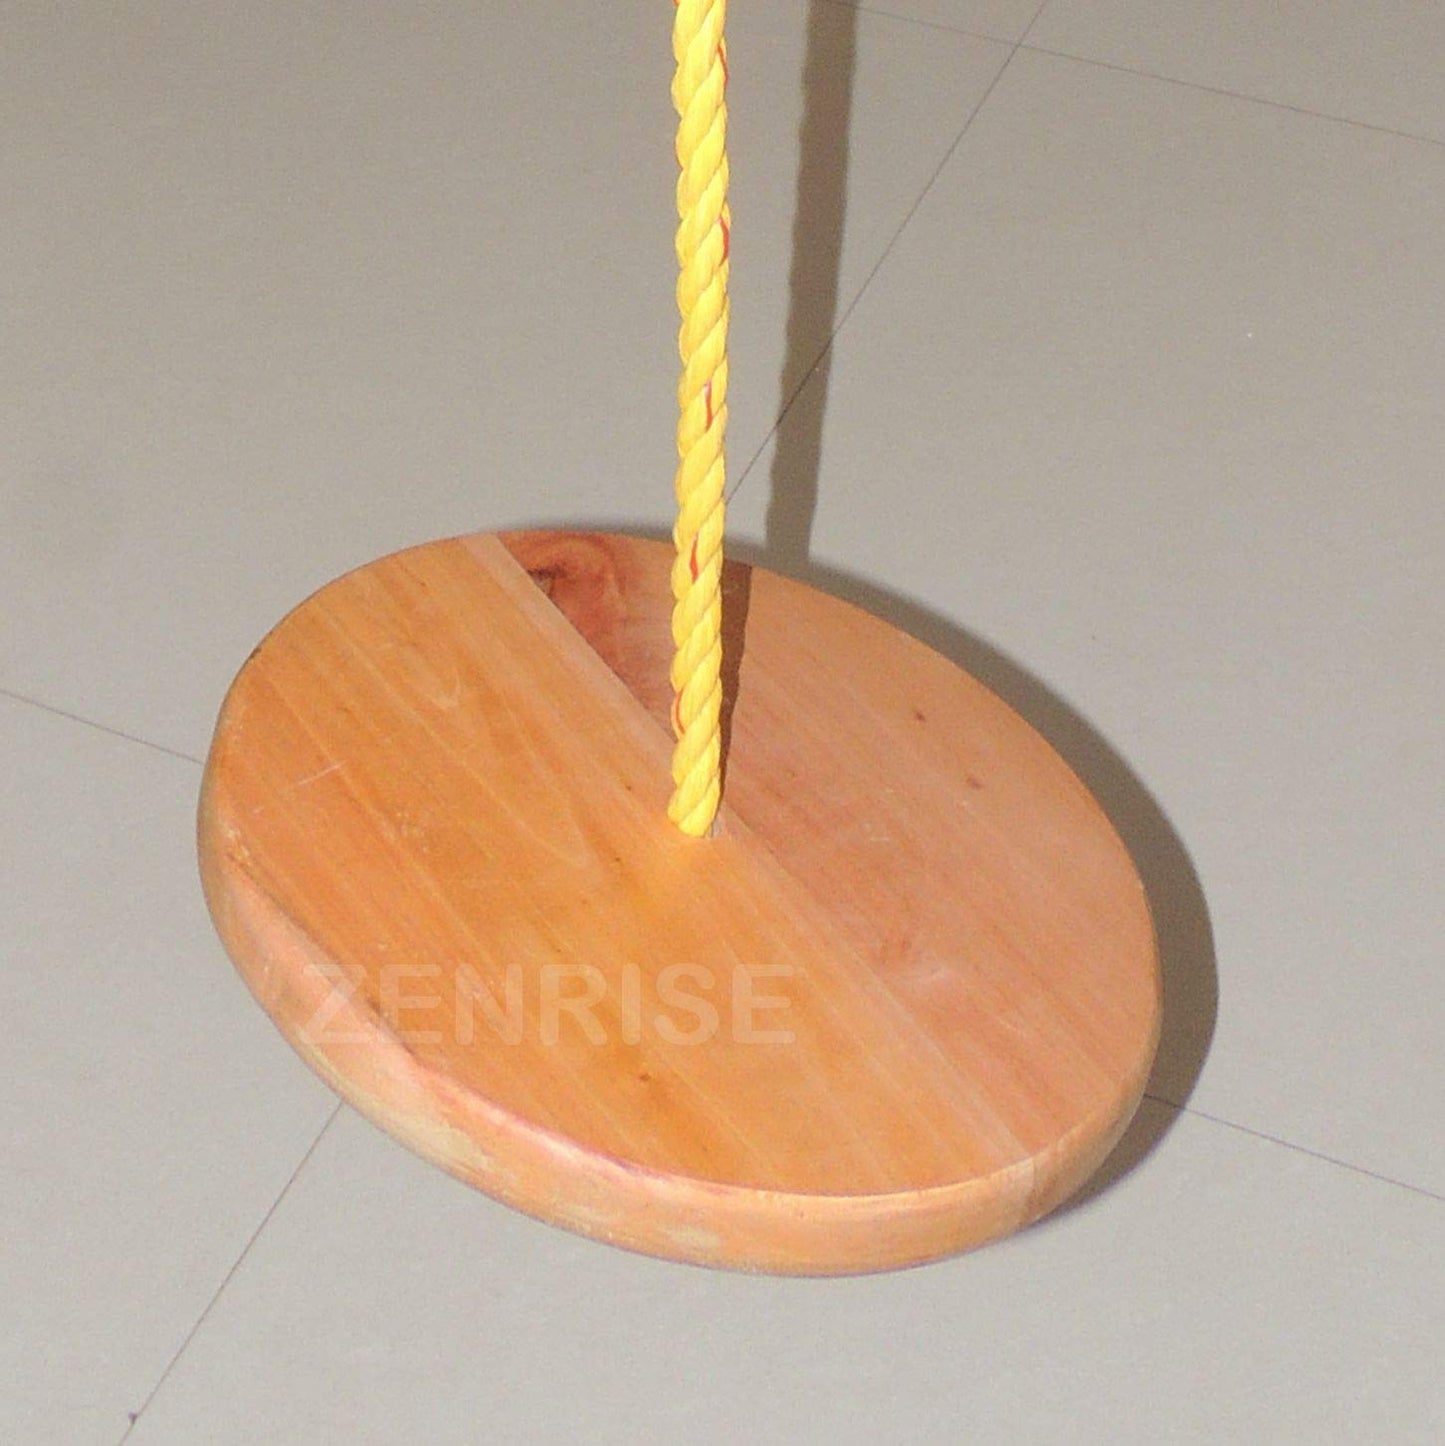 ZENRISE® Hard Single Rope small Wood Swing for Kids and Teens, Round / Plate / Disk / Square - Indoor and Outdoor, 12 inch Dia